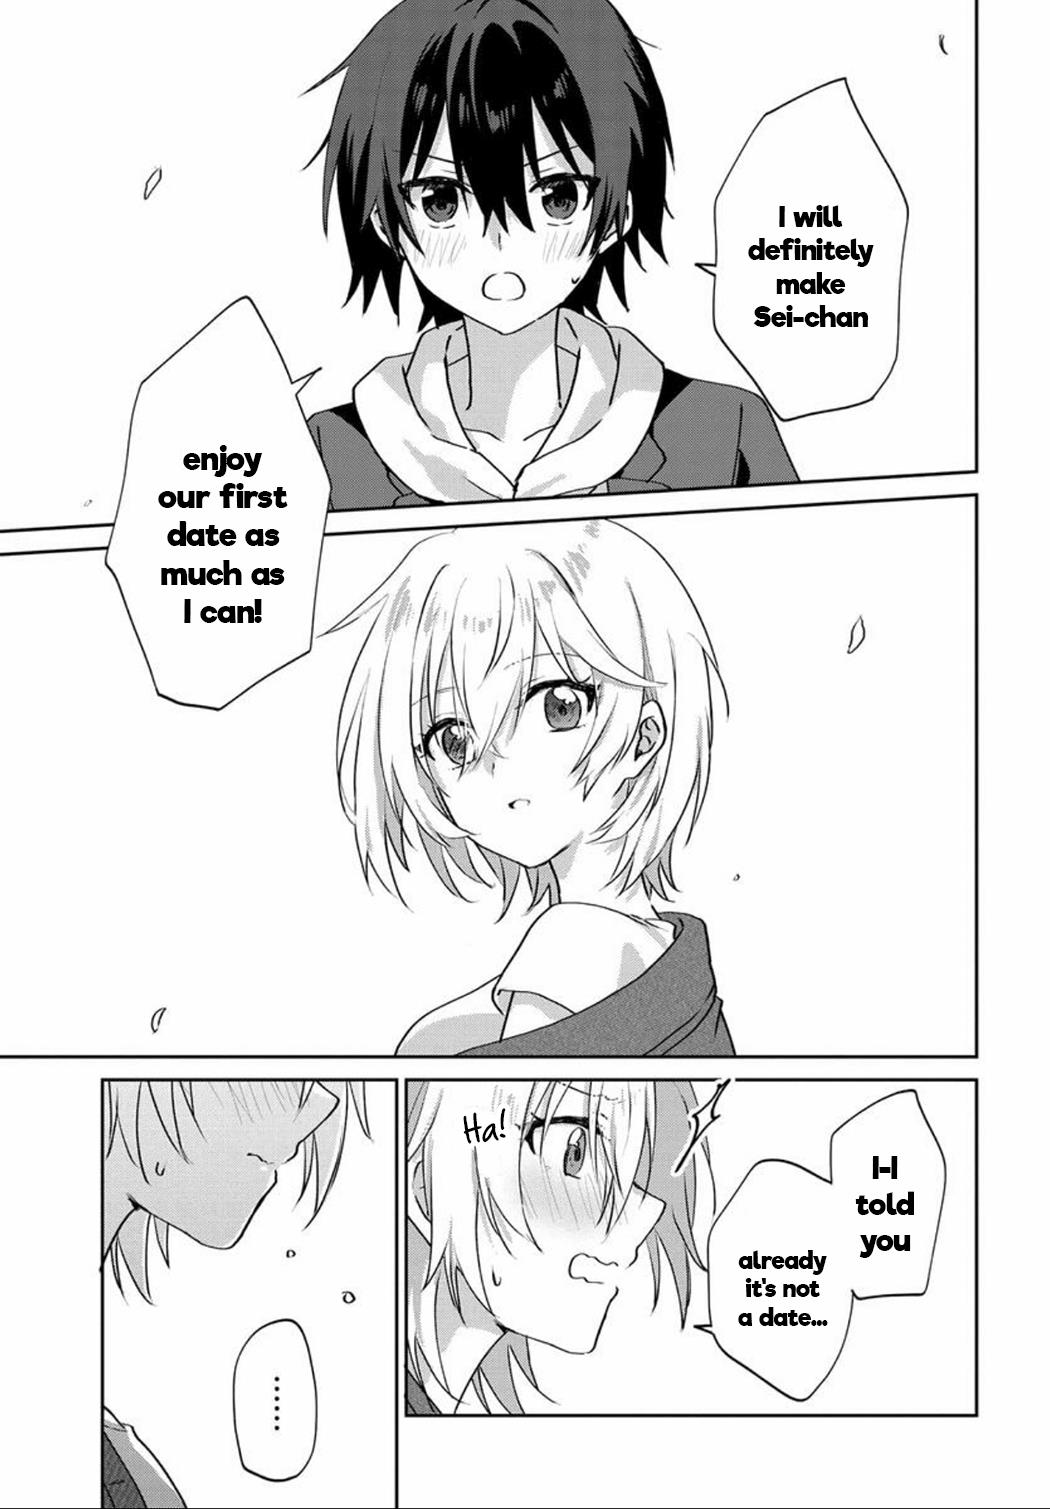 Since I’Ve Entered The World Of Romantic Comedy Manga, I’Ll Do My Best To Make The Losing Heroine Happy - Page 2